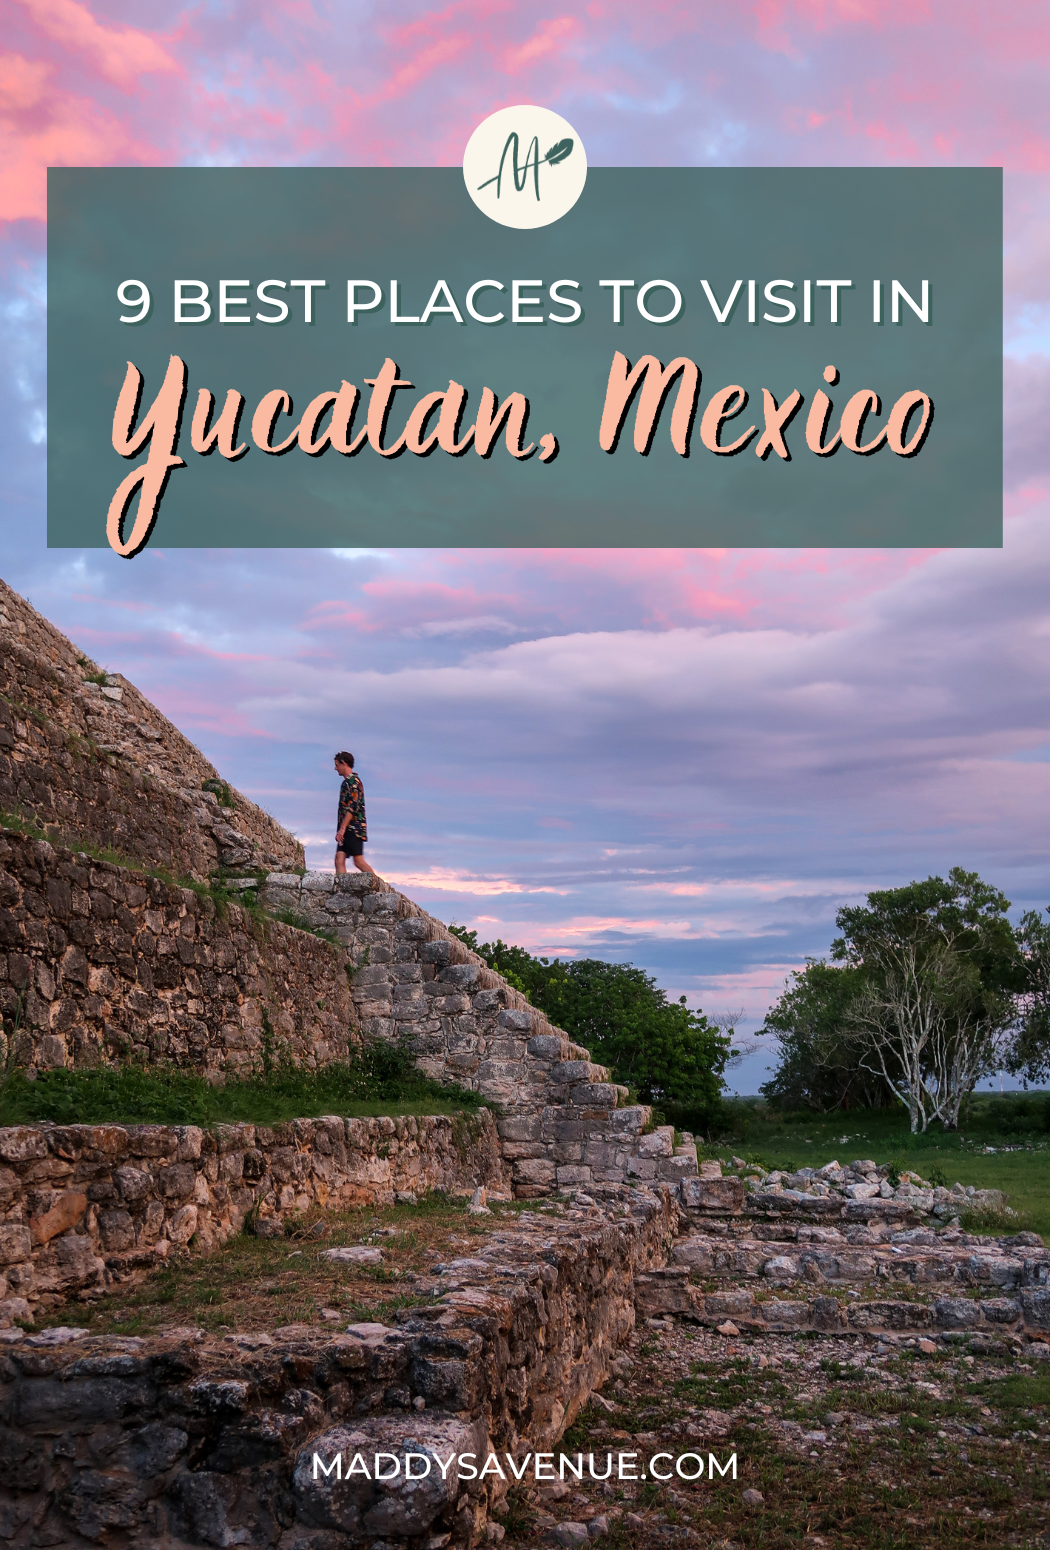 With lush jungles, white-sand beaches, Mayan ruins, vibrant cities, it's not easy to create a short list of the best places in Yucatan, Mexico! This state is an underrated gem, bursting with delicious food, fascinating history, and incredibly rich culture and traditions. In this guide, discover the best places to visit in Yucatán – as well as the best things to do in the Yucatan Peninsula, and must-know Mexico travel tips! Ready for the Mexico vacation of your dreams?
So, where should you go in Yucatán, México? From famous places like Chichen Itza and Mérida to unknown spots like the "Yellow City" and Ek Balam - you're about to find out!

In this guide, we’ll dive into the best places to visit in Yucatán – as well as the best things to see and do in each Yucatan destination. And, as always, I’ll also share my must-know tips to help you plan the trip of your dreams!